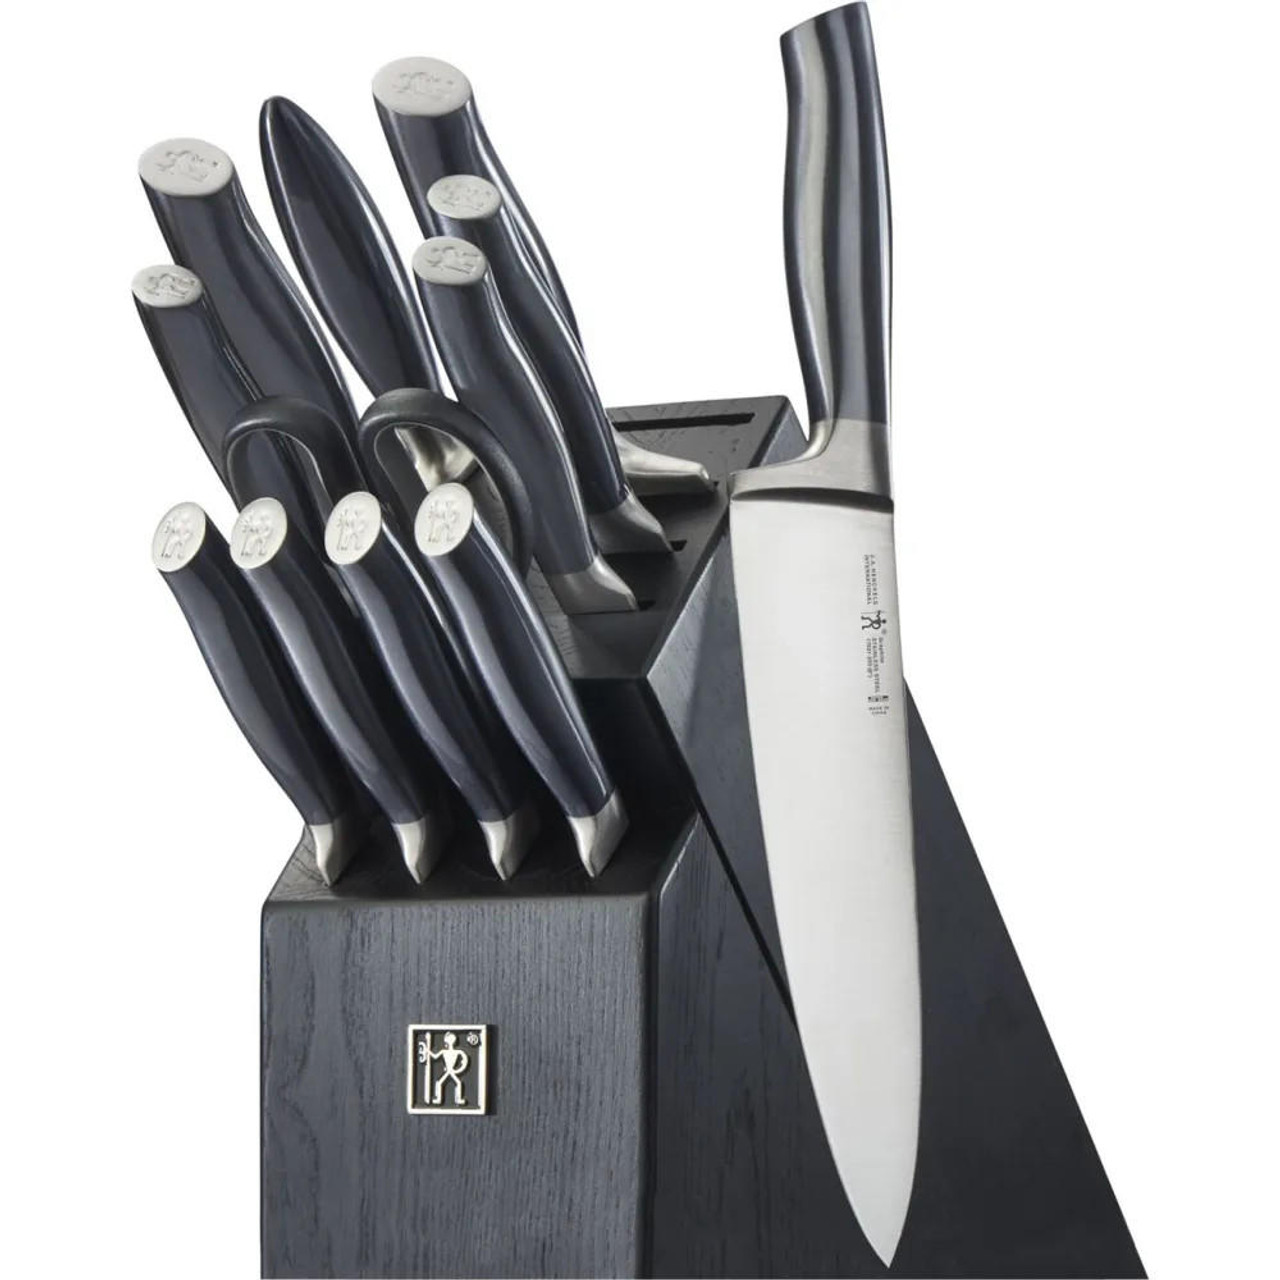  Henckels Satin-Finished Graphite 13 Piece Knife Set with Wood Block 